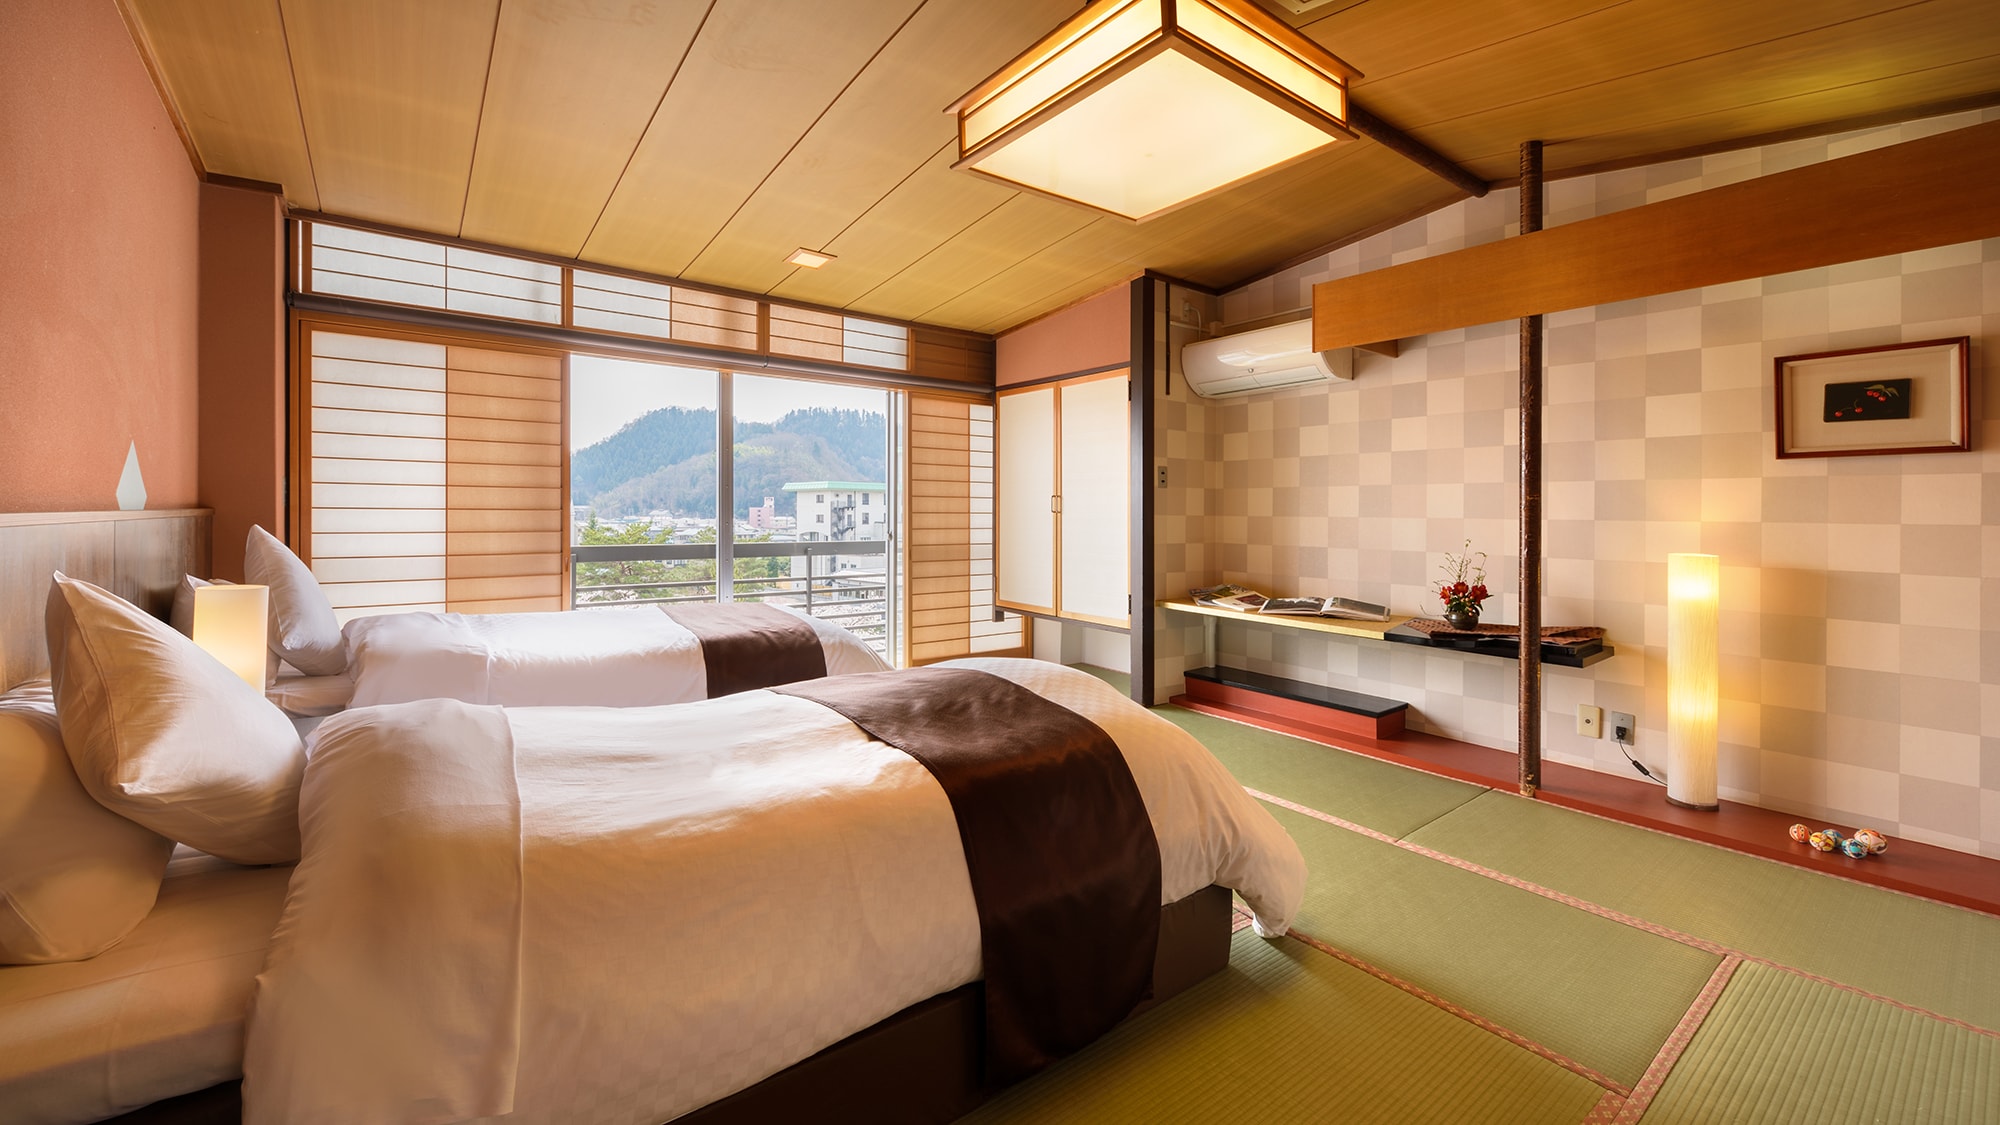 ■ Standard Japanese-style room ■ A healing space where you can relax your shoulders the moment you enter